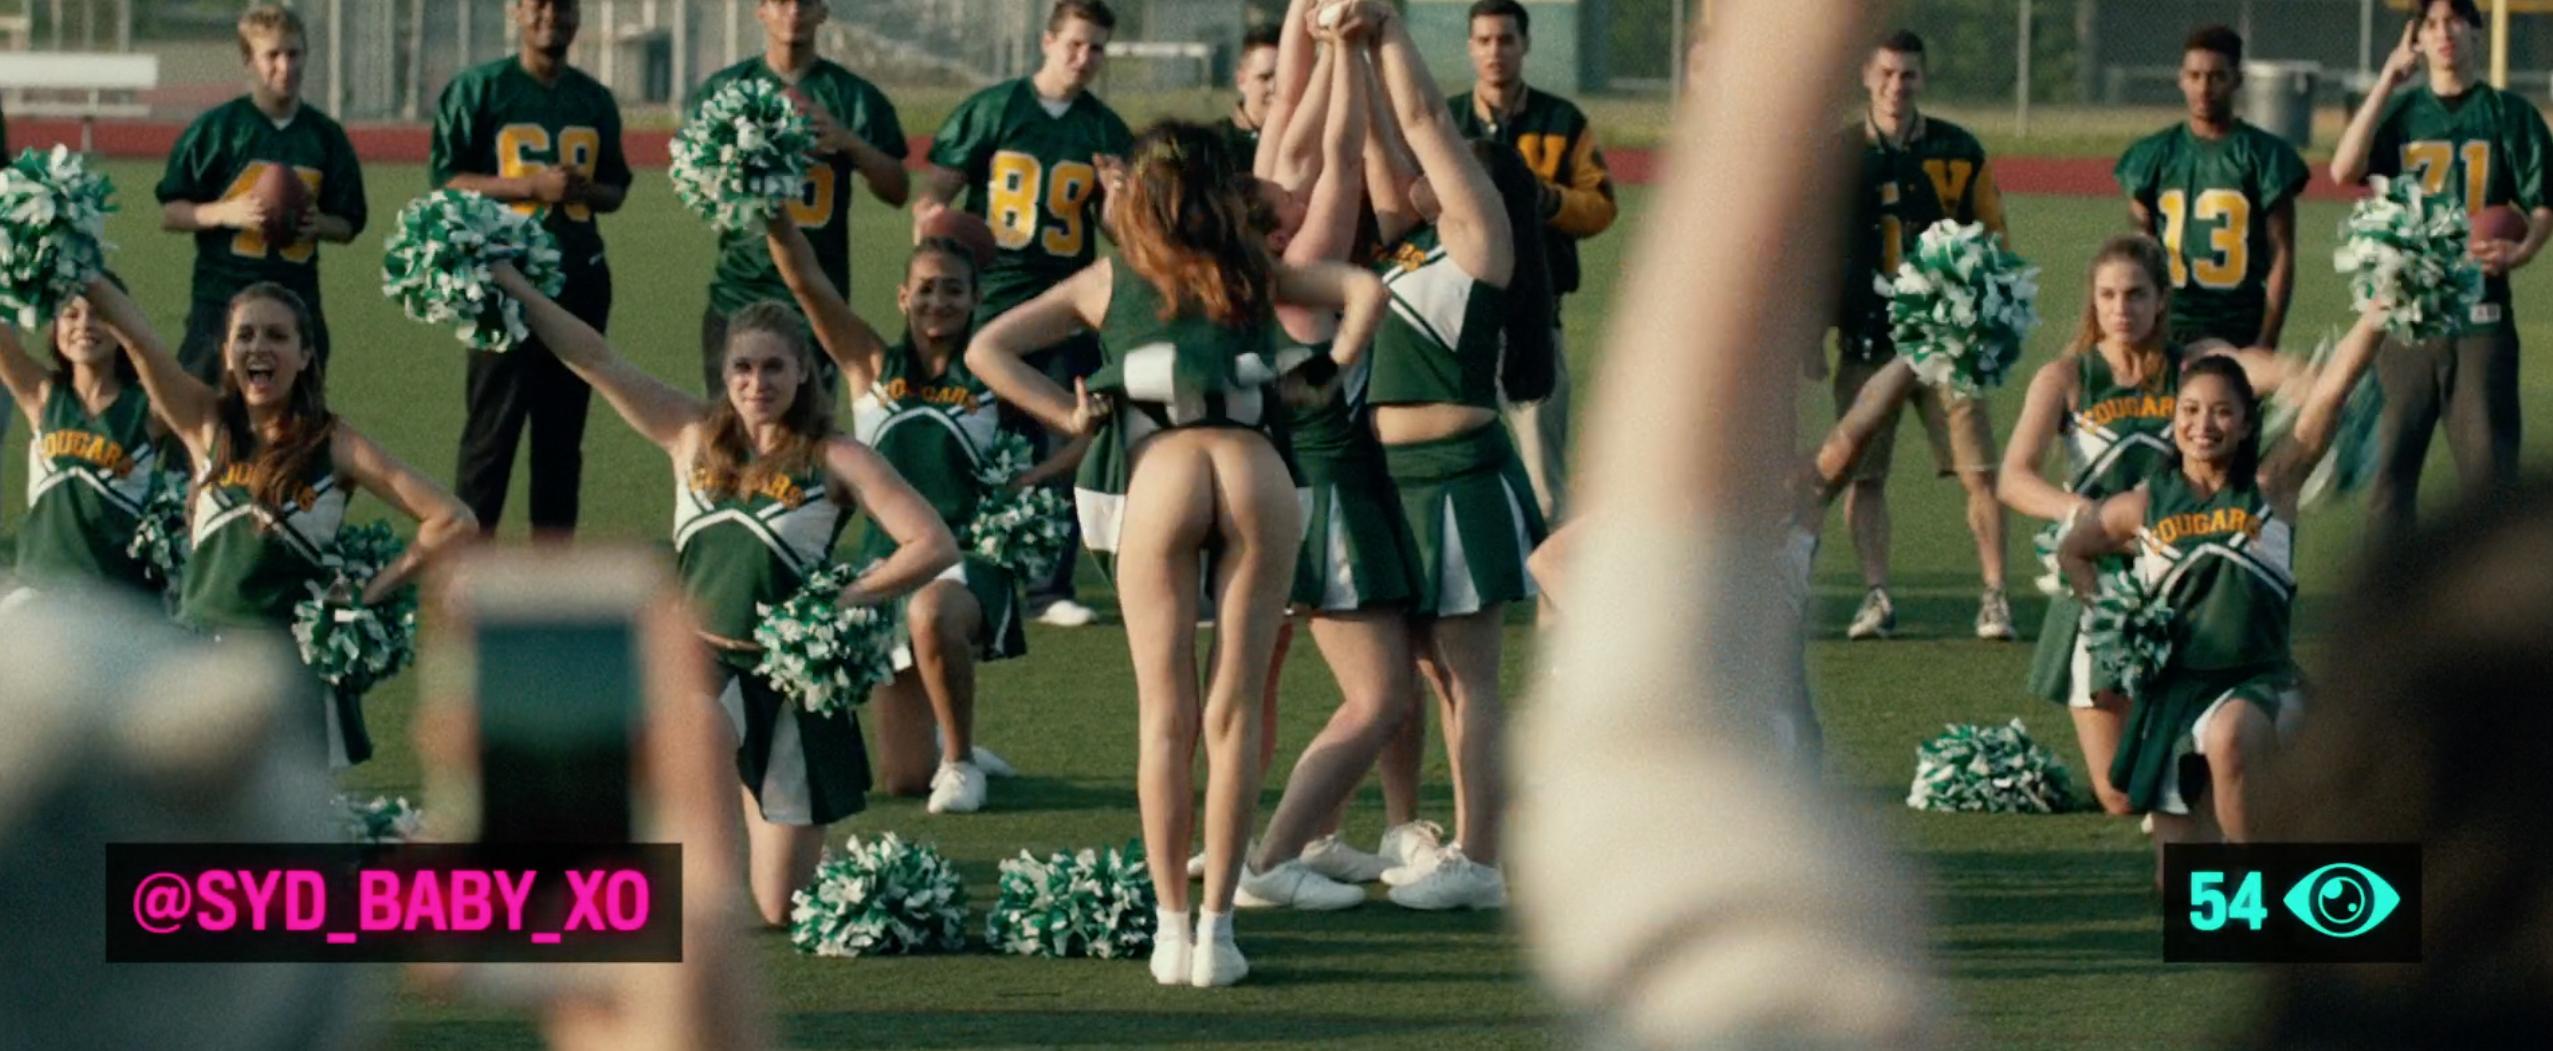 Emily Meade’s Ass From “Nerve”